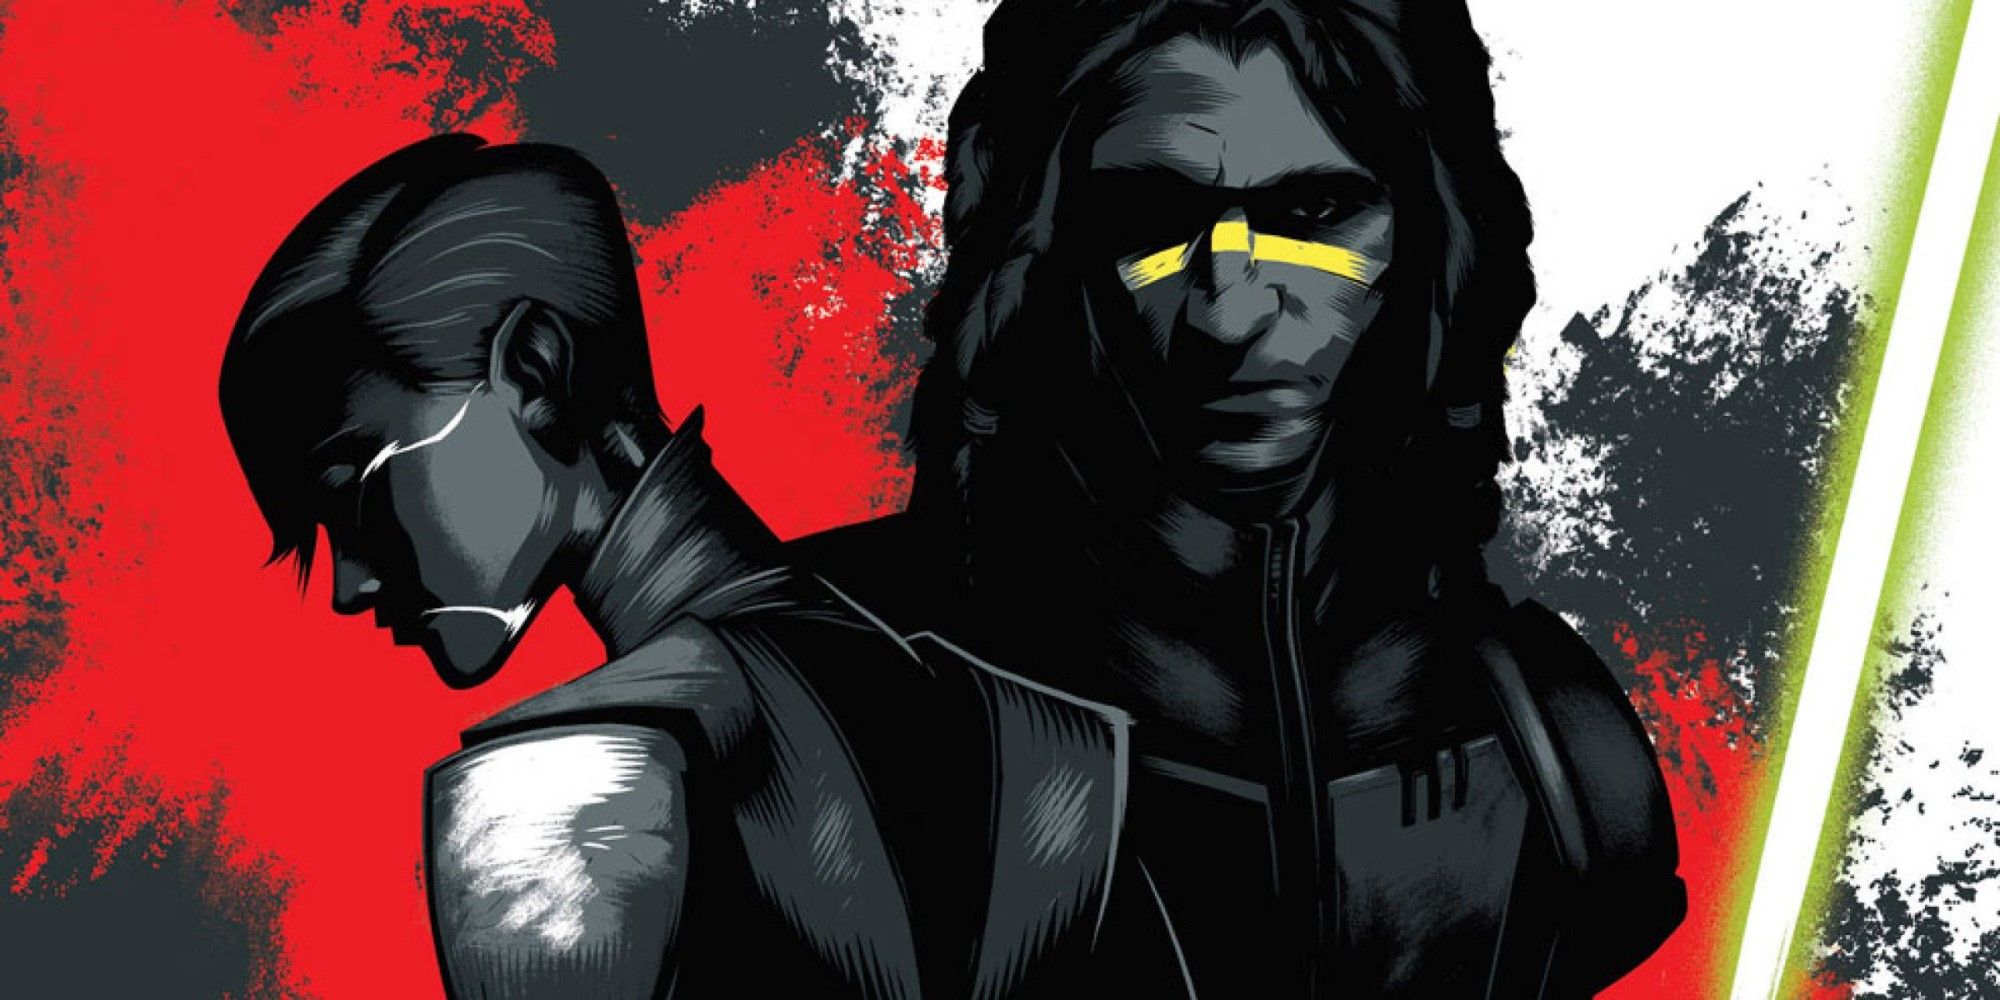 Quinlan Vos and Asajj Ventress on the cover of Star Wars Dark Disciple.